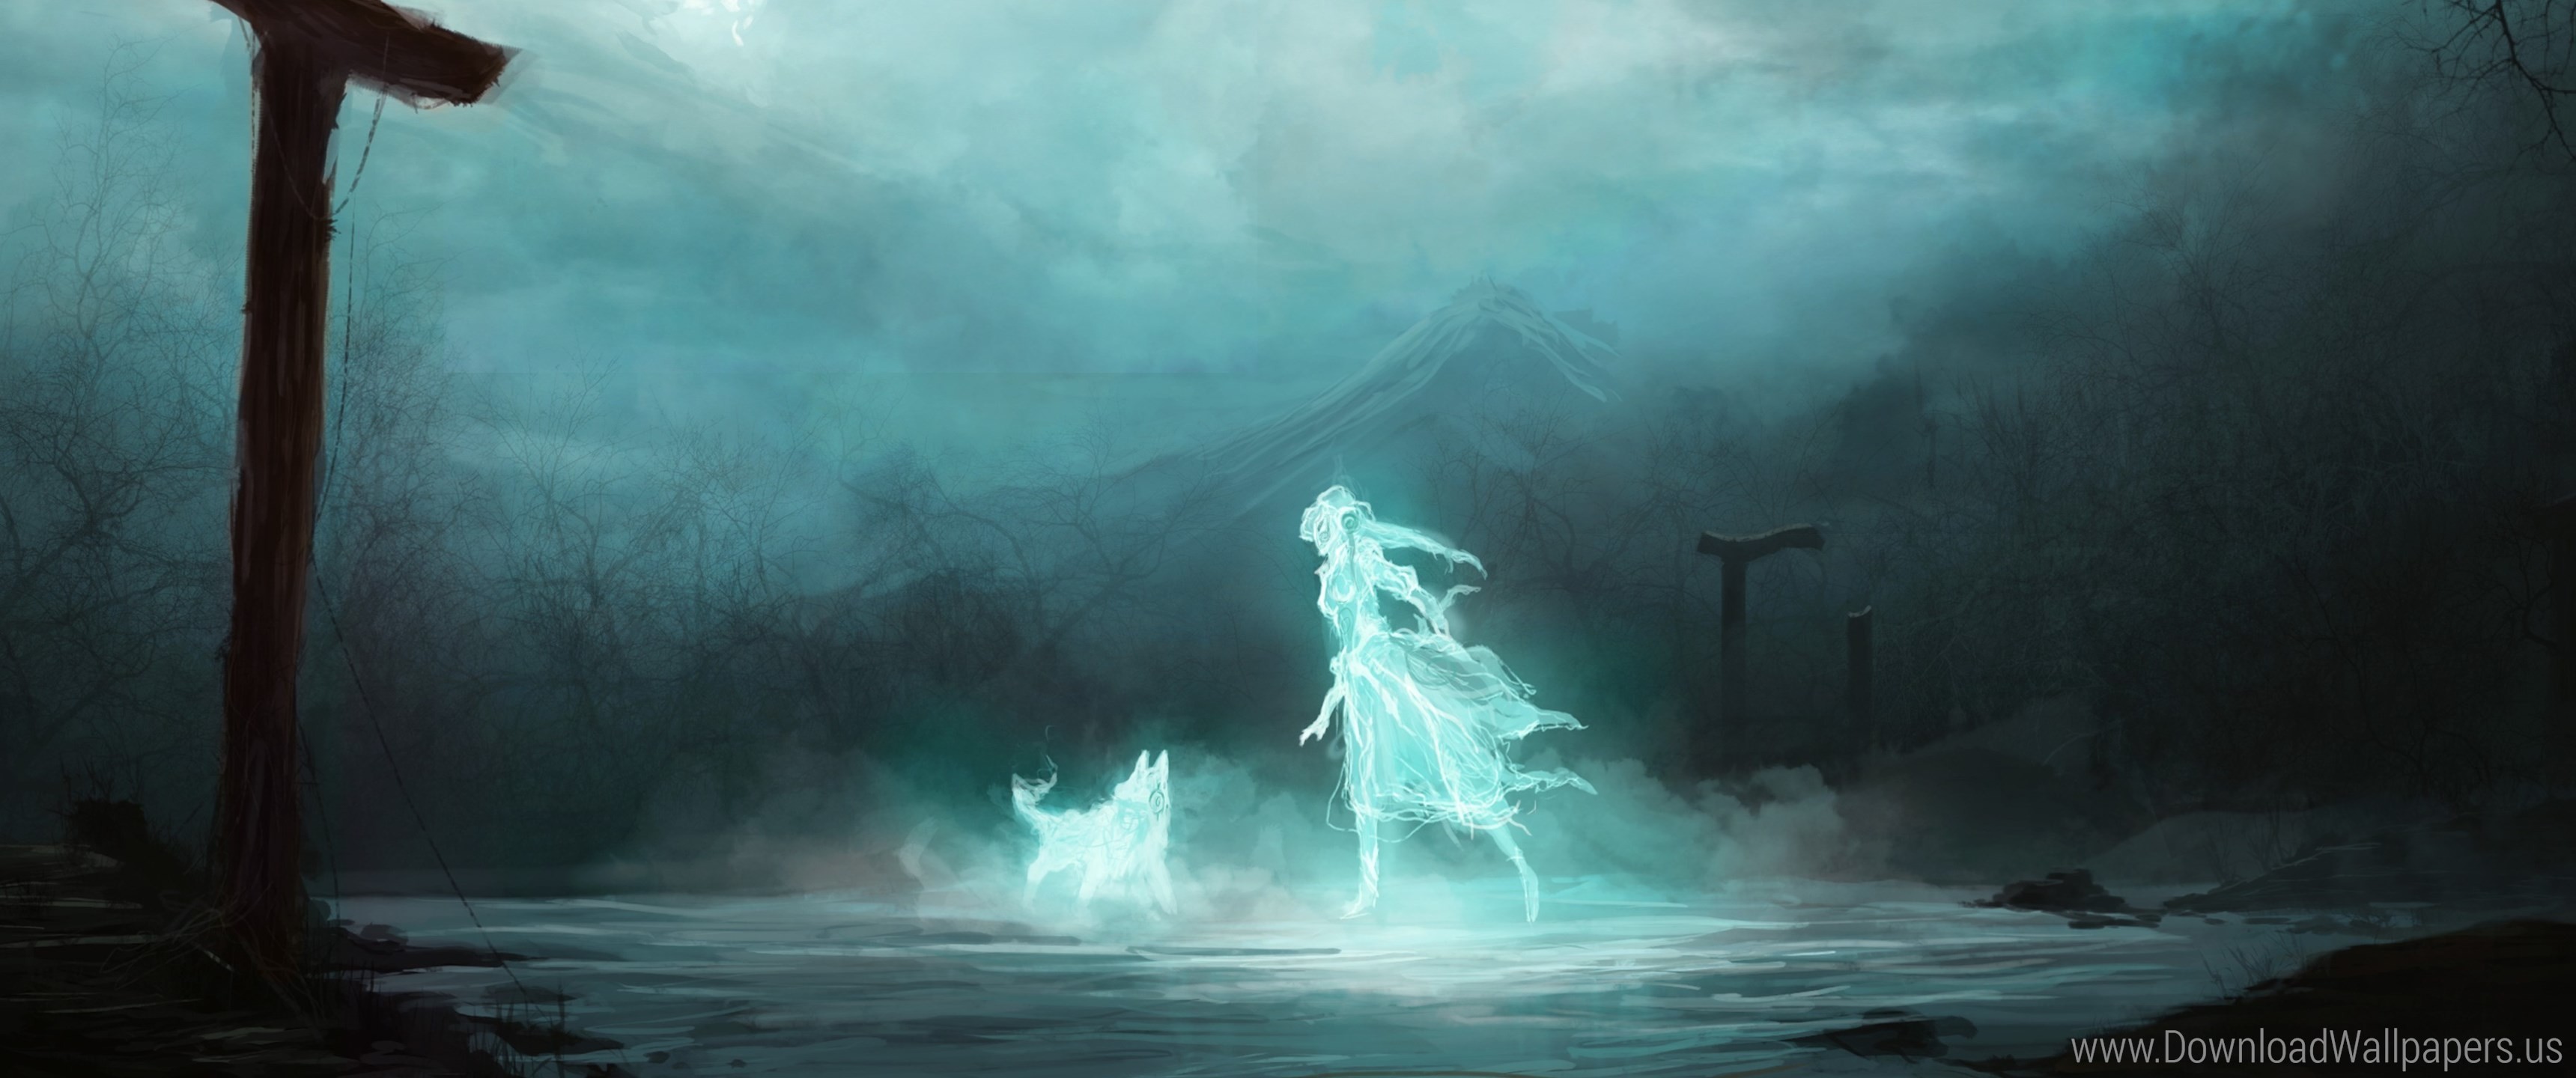 3440x1440 Download Wide 21:9  - Arches, Art, Fantasy, Ghost, Girl, Moon,  Mountain, Night, Ruins, Spirit, Wolf Wallpaper